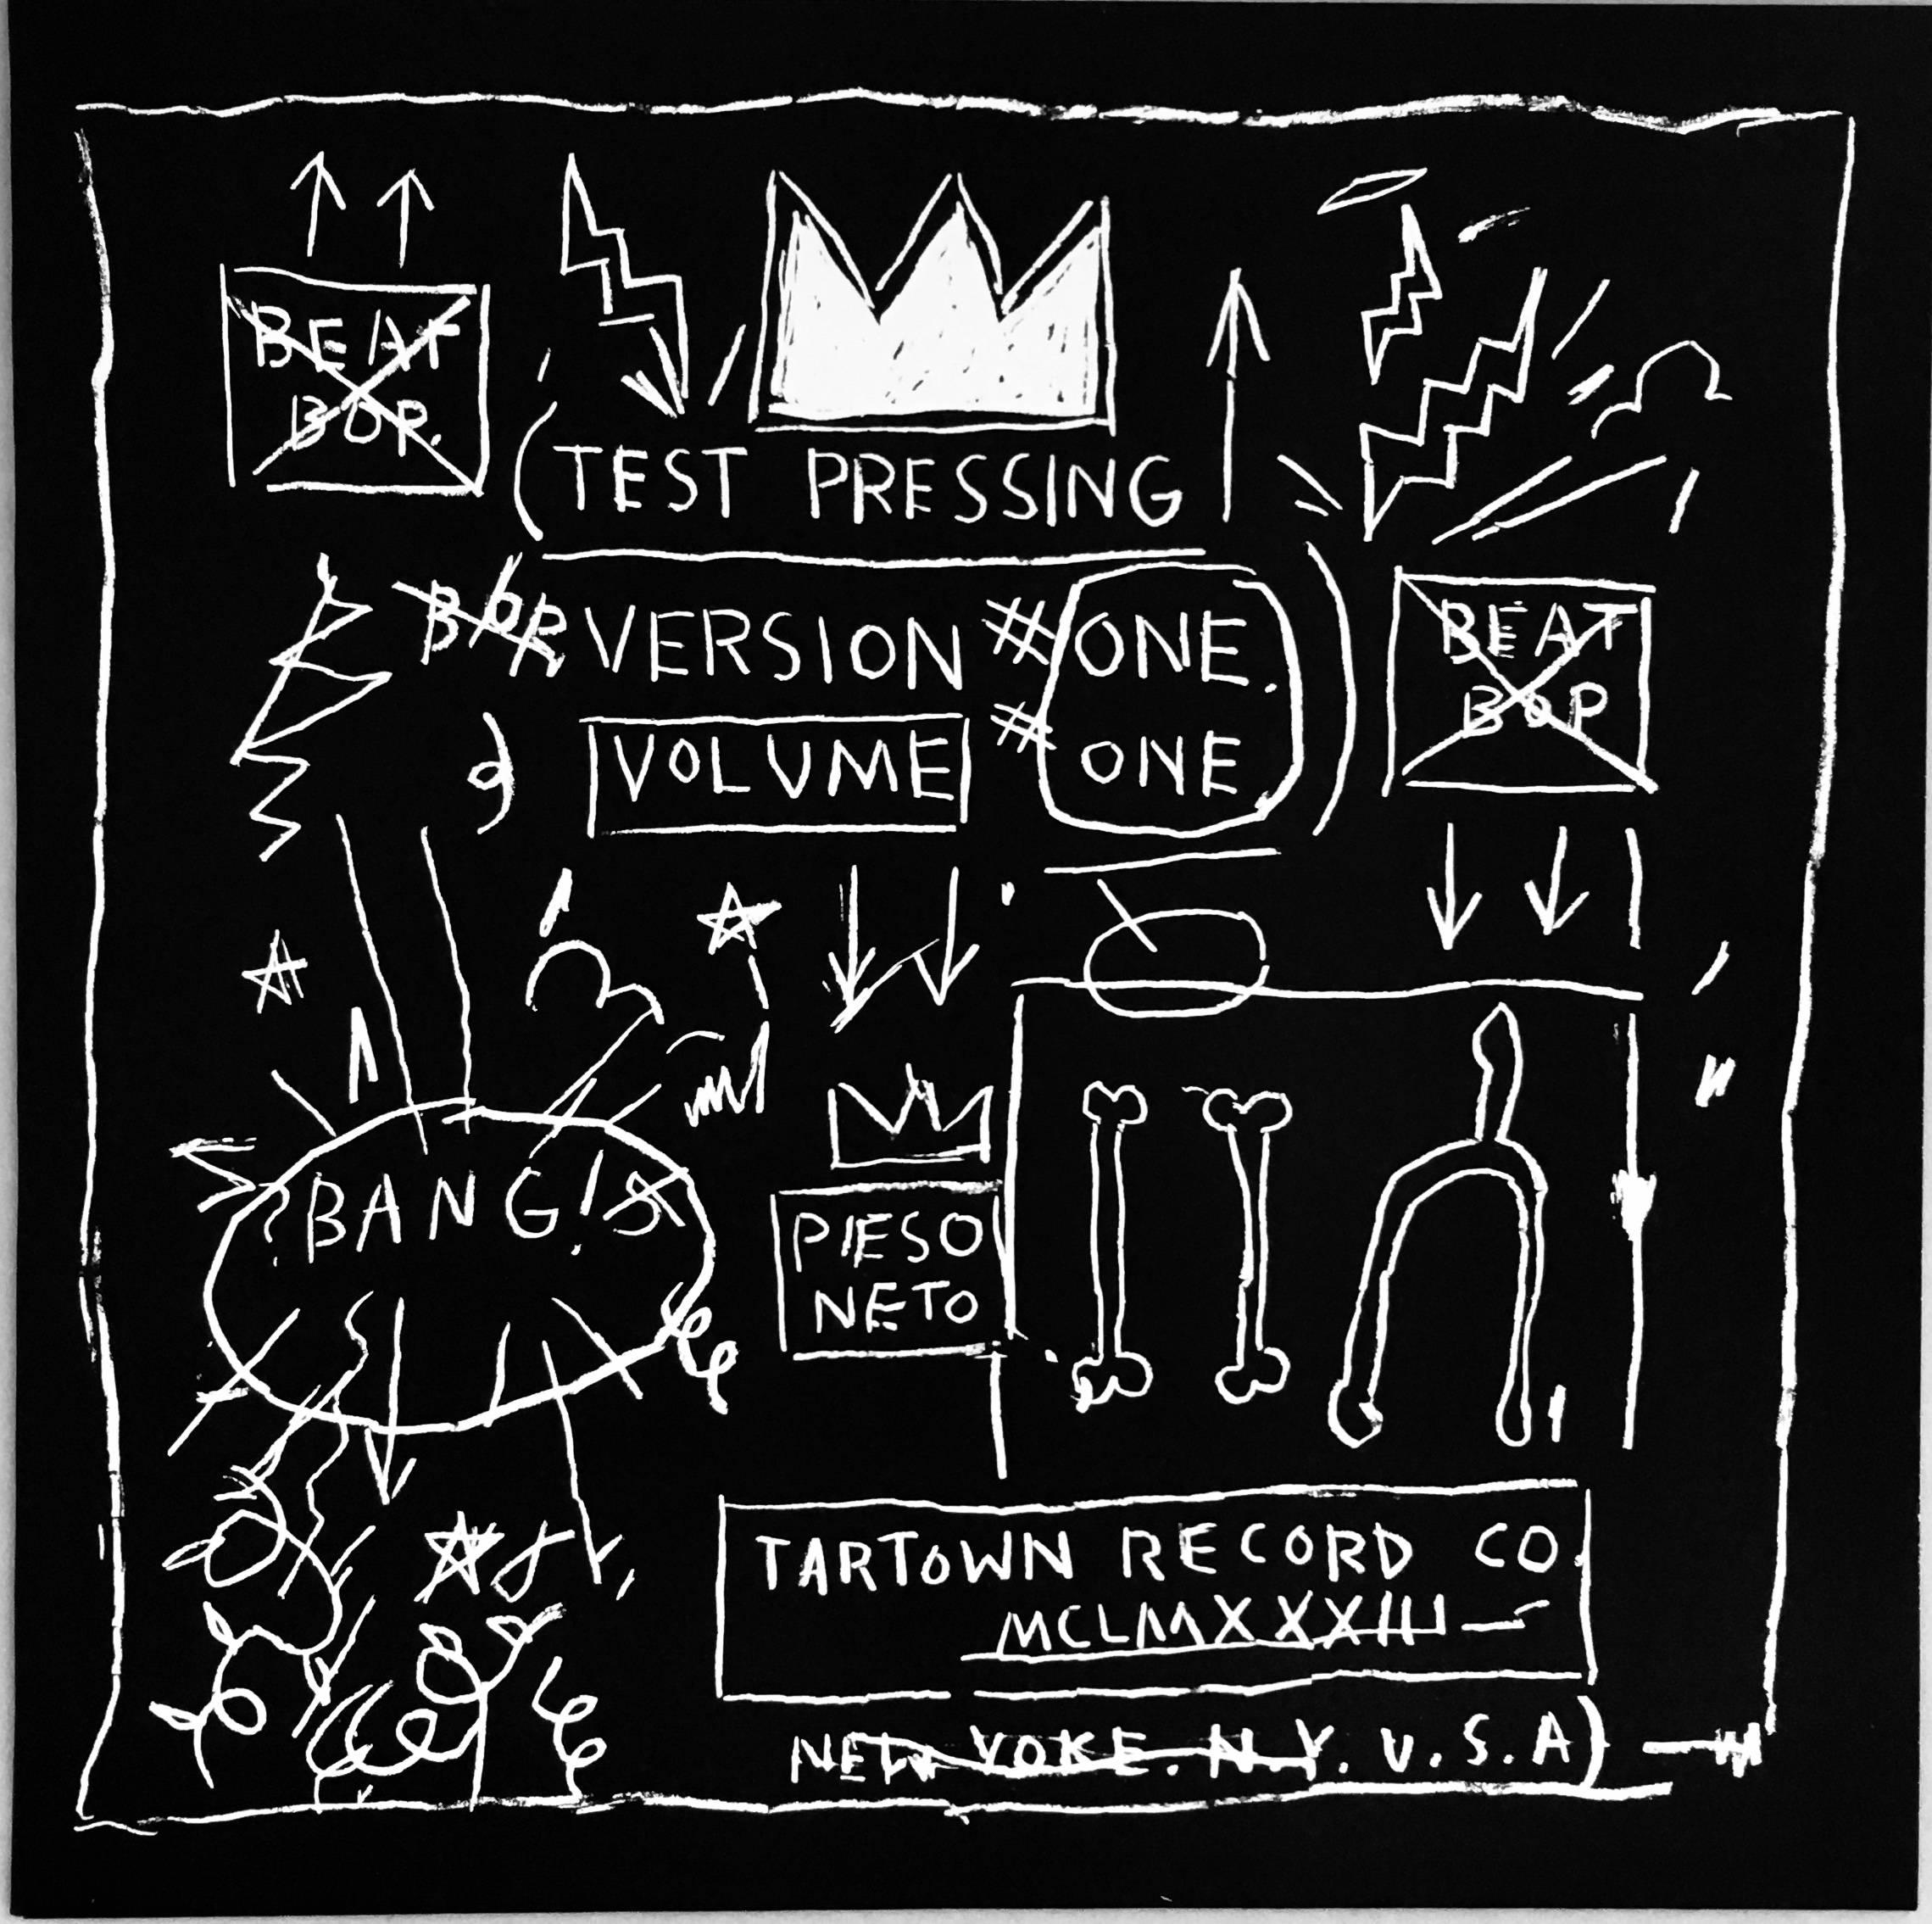 Basquiat Beat Bop Vinyl Record 
30th anniversary pressing of Basquiat's historic Beat Bop vinyl record (1983), featuring Jean Michel's signature cover art and production as well as licensed trademark by the Estate of Jean-Michel Basquiat. Looks